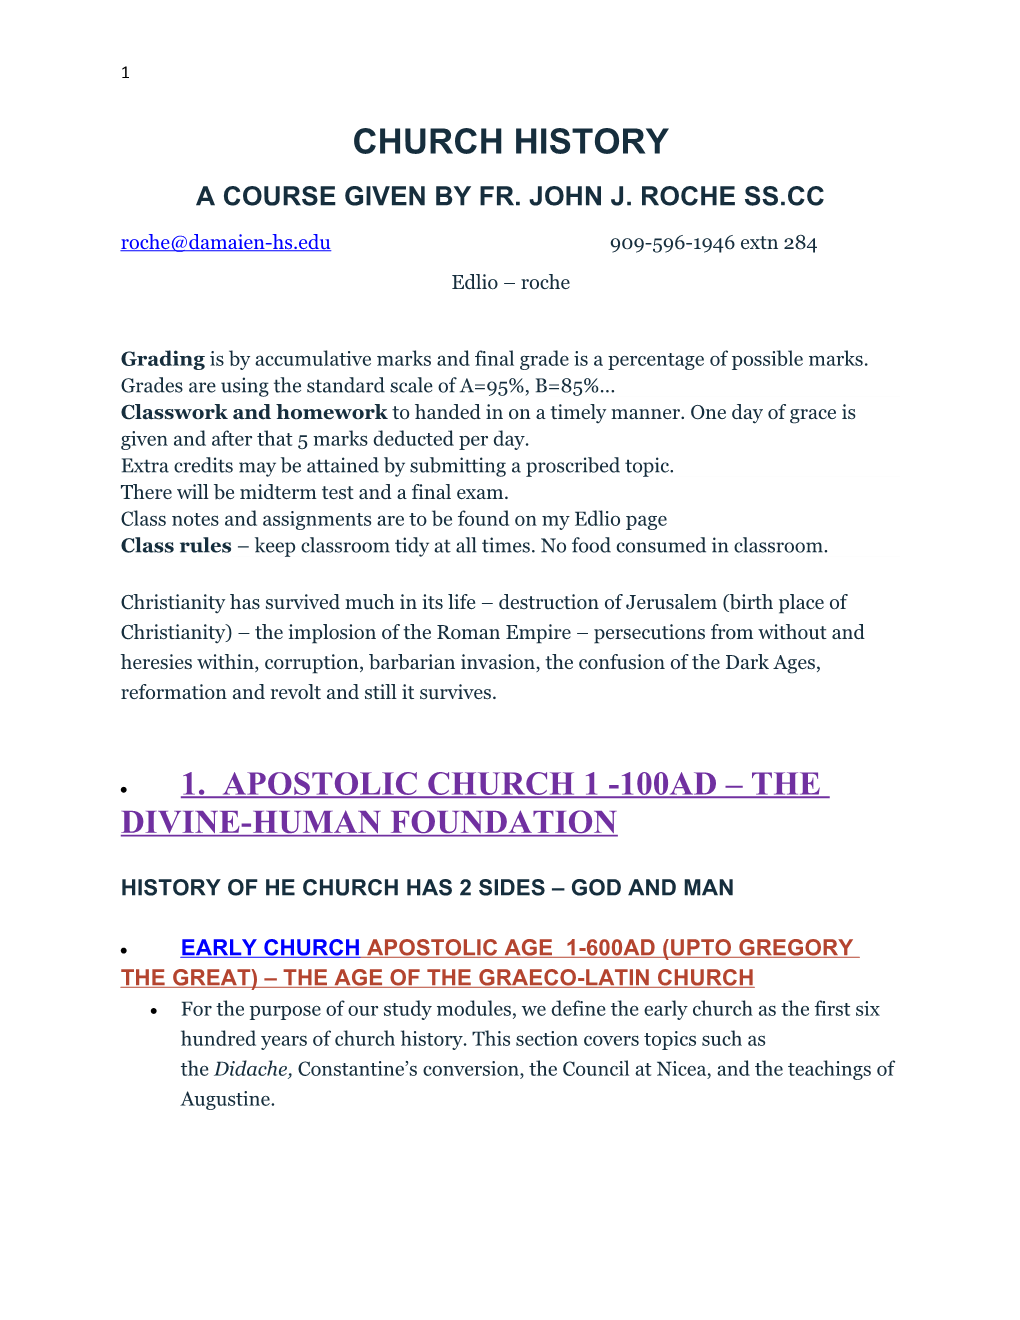 A Course Given by Fr. John J. Roche SS.CC